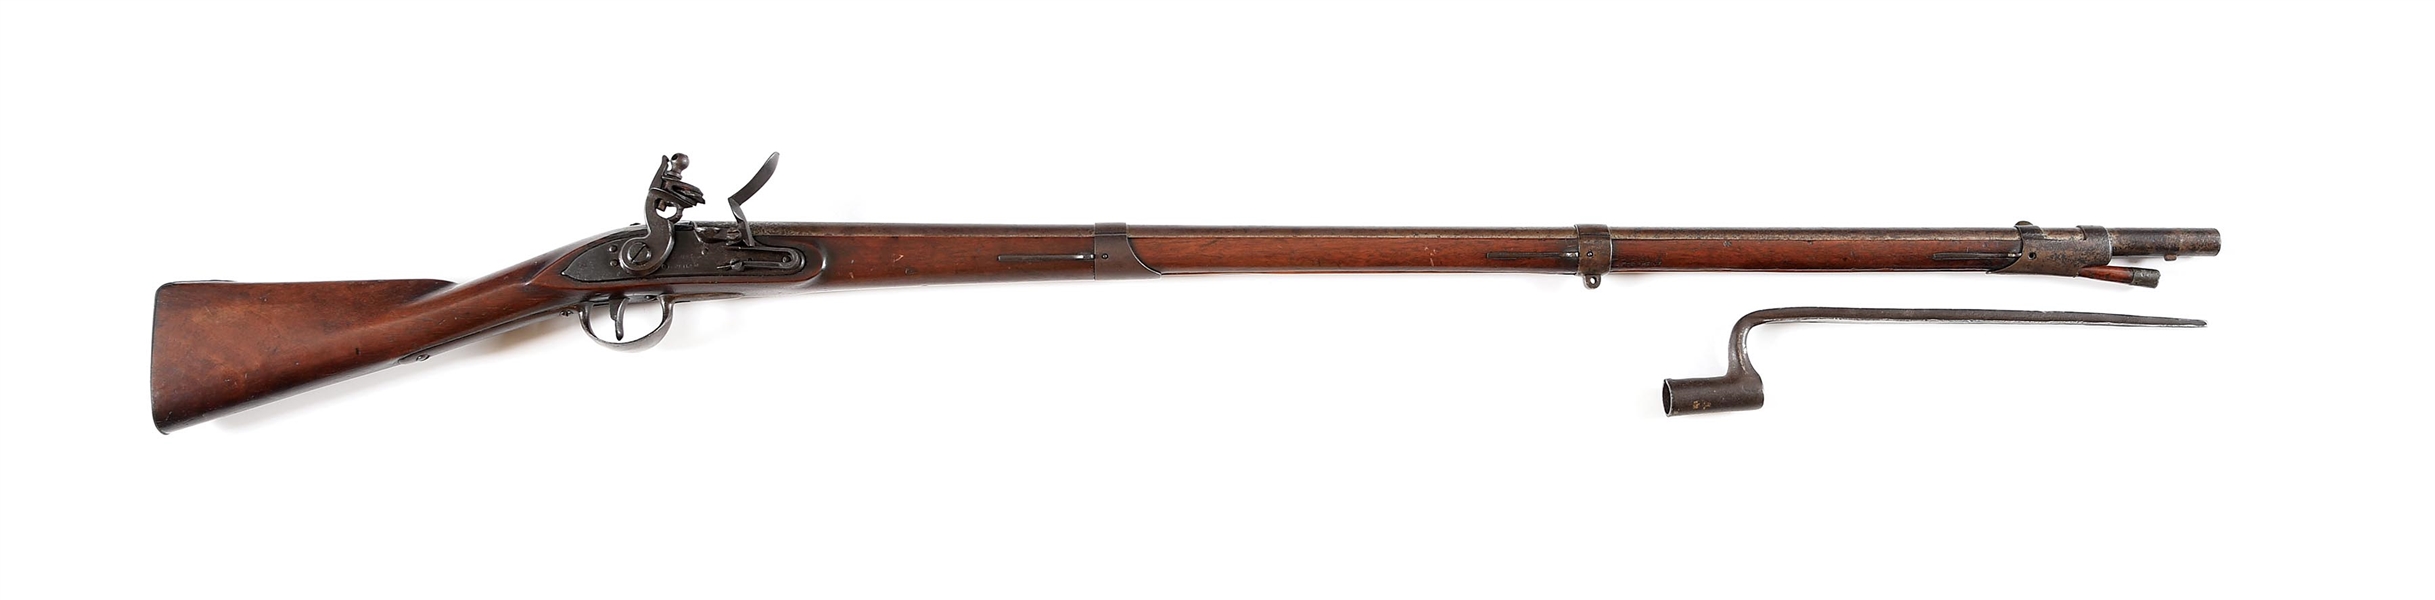 (A) MARYLAND BRANDED US MODEL 1808 MUSKET BY DANIEL HENKELS WITH BAYONET.